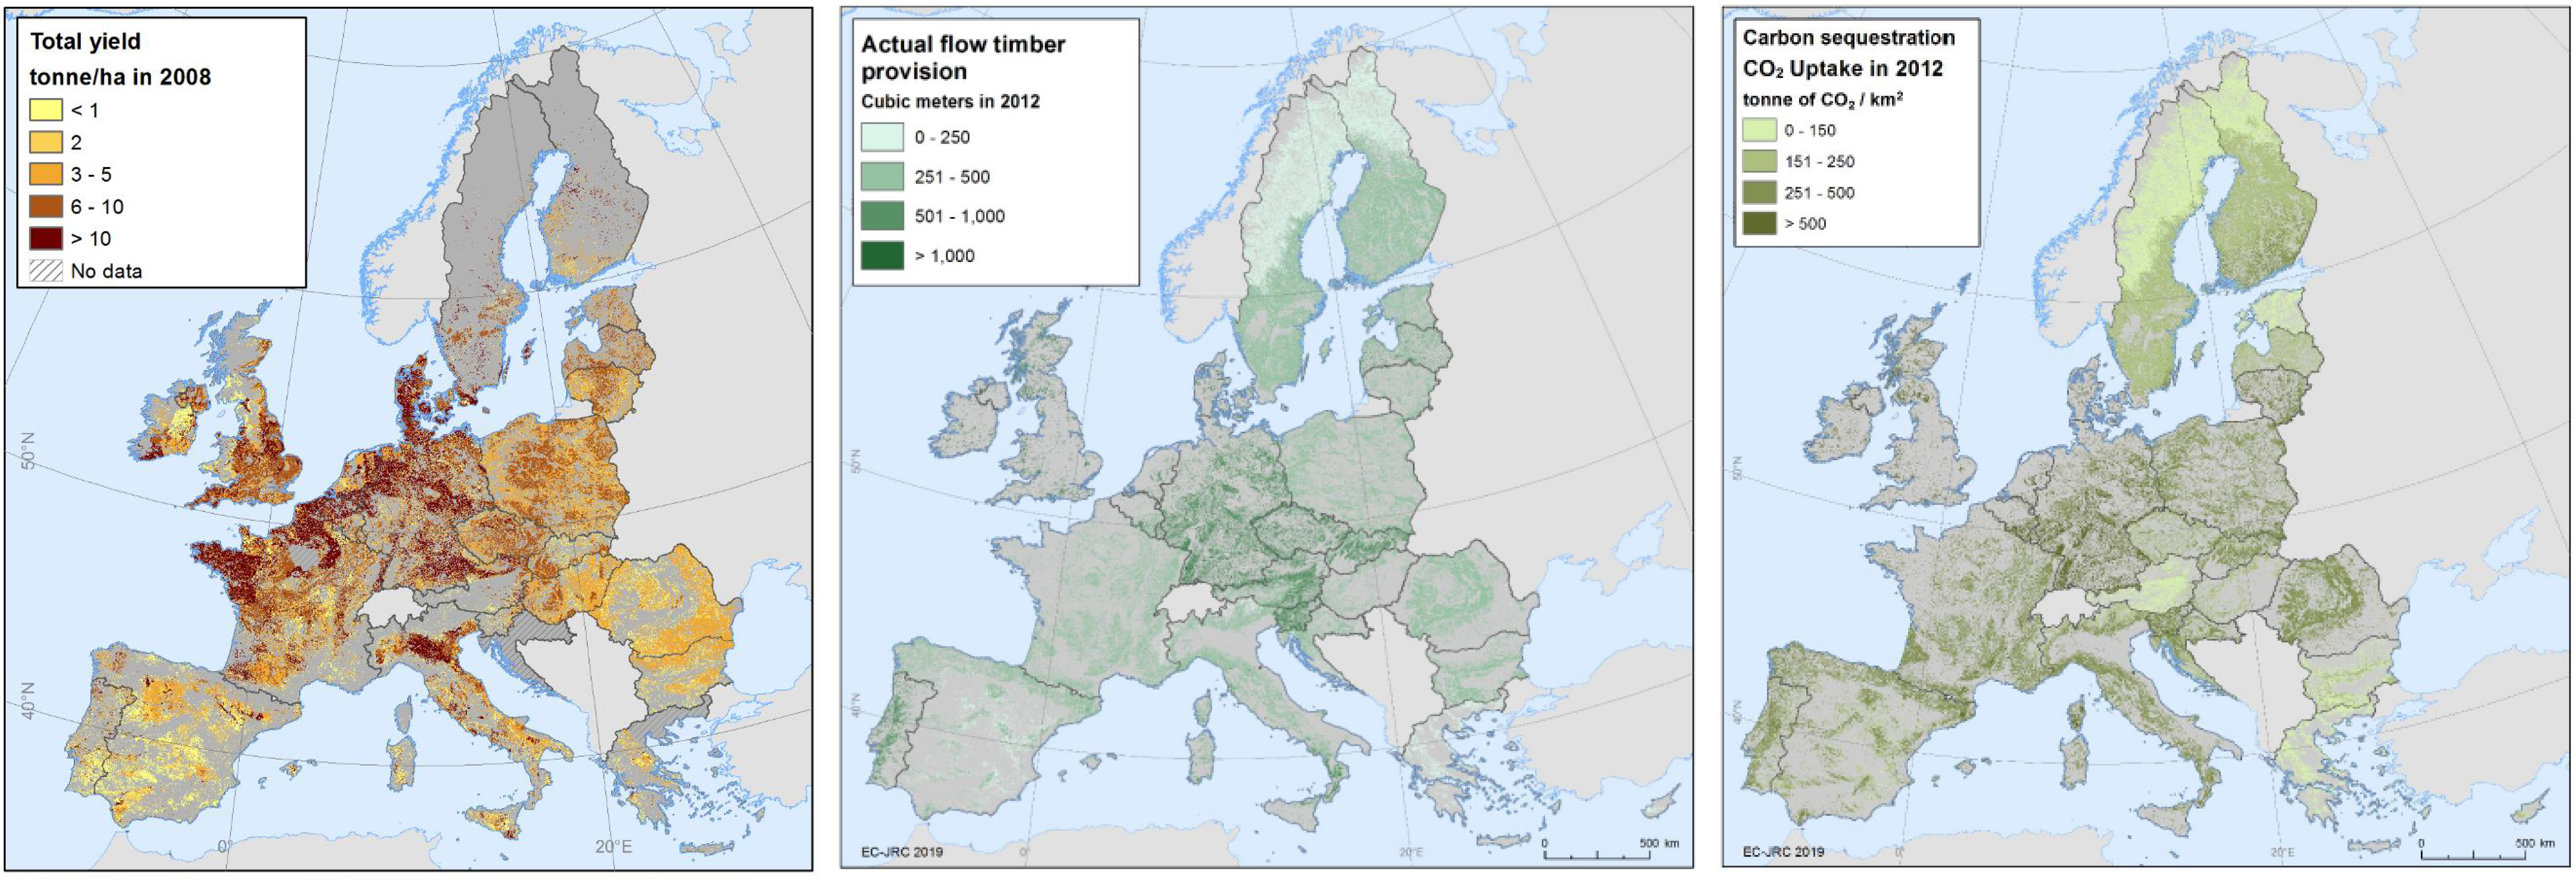 Examples of modelled ecosystem services for the EU (crops; timber; carbon sequestration). Source: [38].